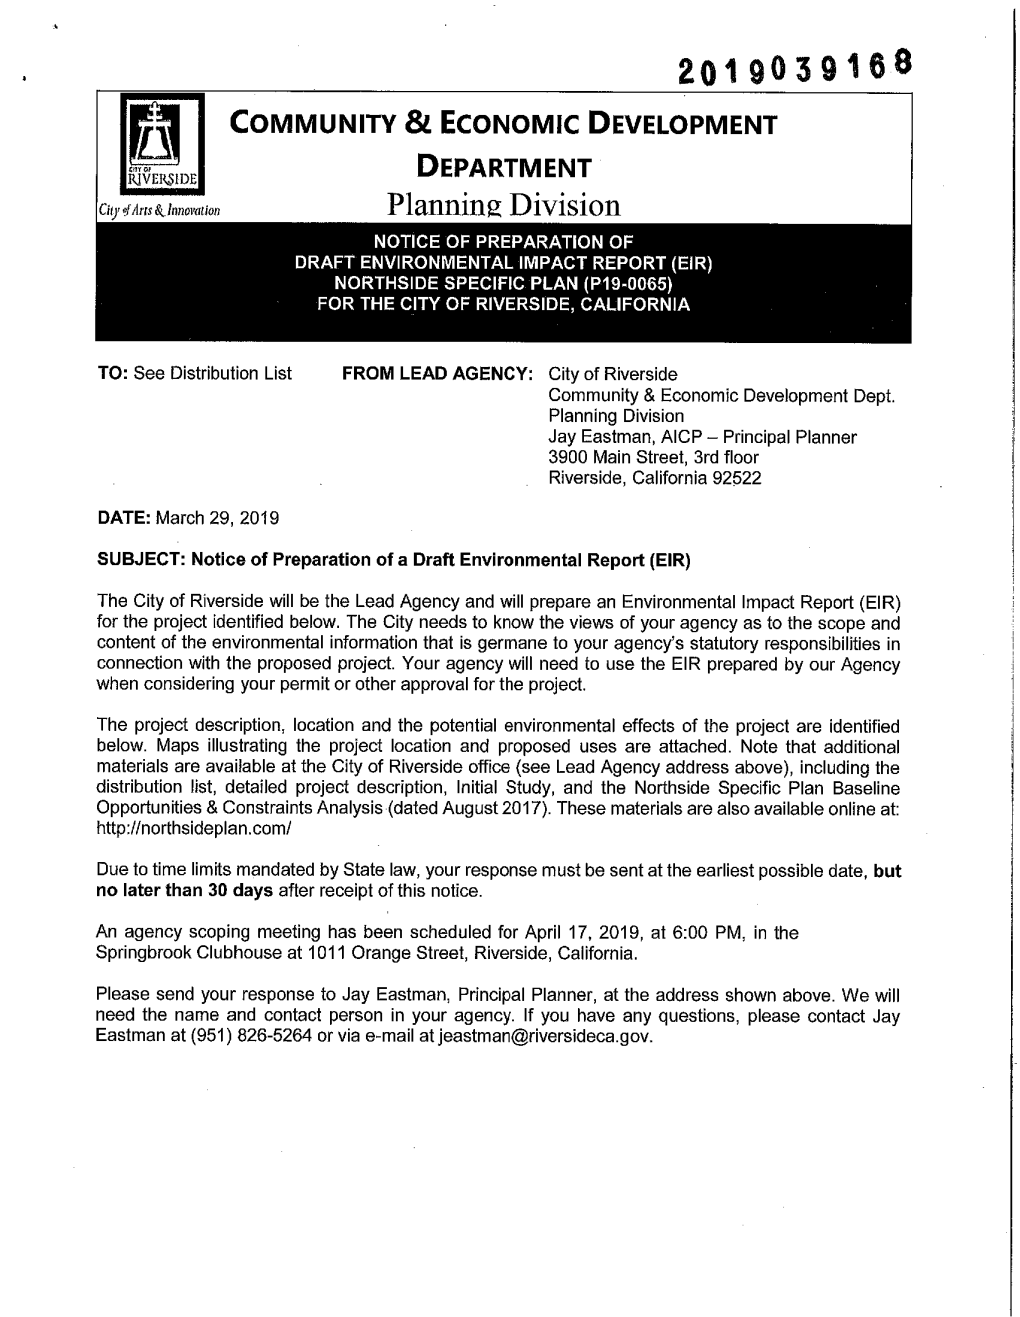 Planning Division NOTICE of PREPARATION of DRAFT ENVIRONMENTAL IMPACT REPORT (EIR) NORTHSIDE SPECIFIC PLAN (P19-0065) for the CITY of RIVERSIDE, CALIFORNIA